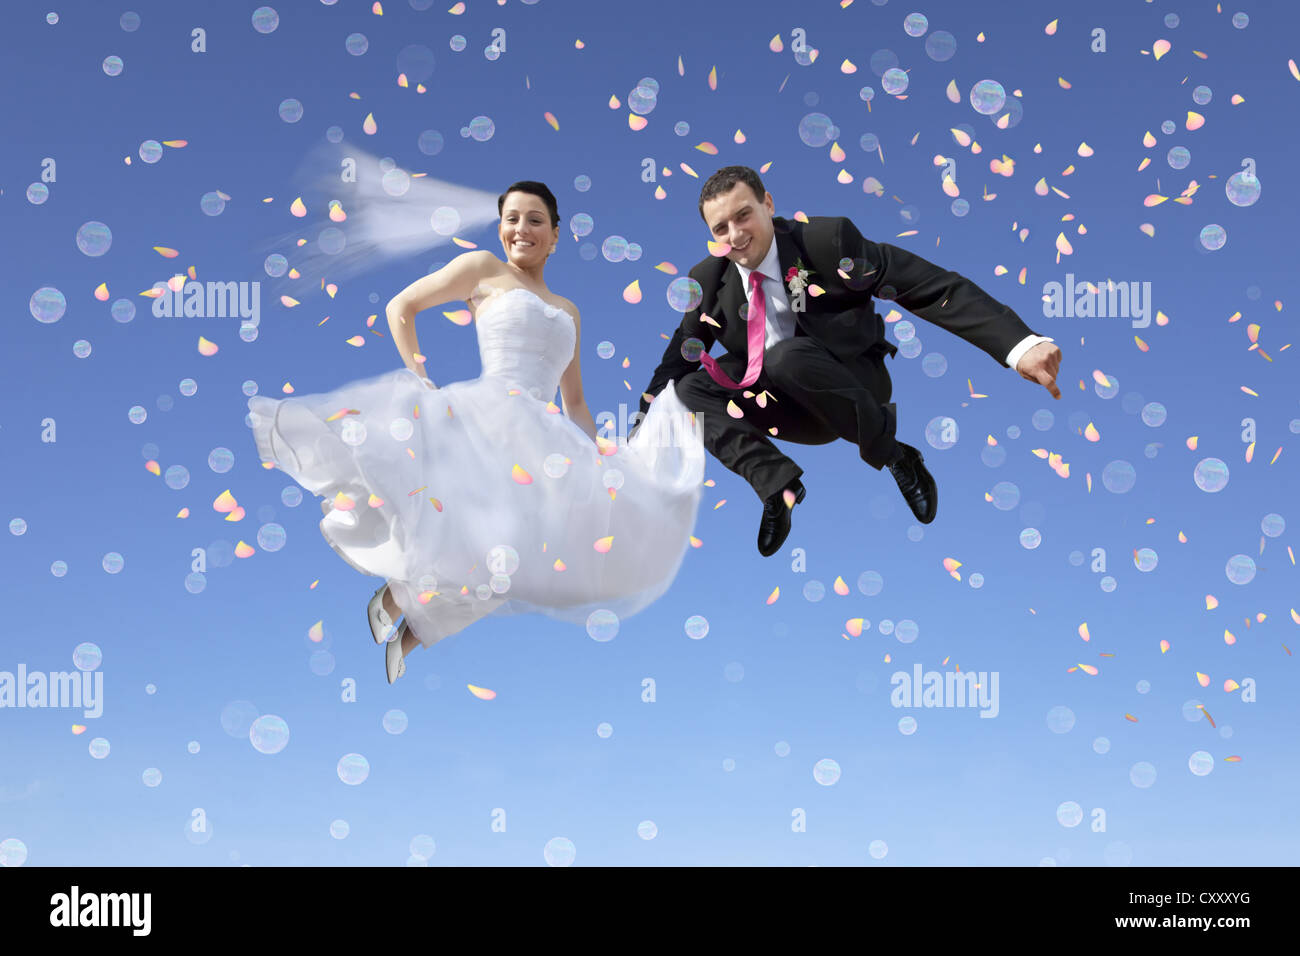 Bride and groom, bridal couple jumping in to the air, against a blue sky, bubbles, confetti Stock Photo